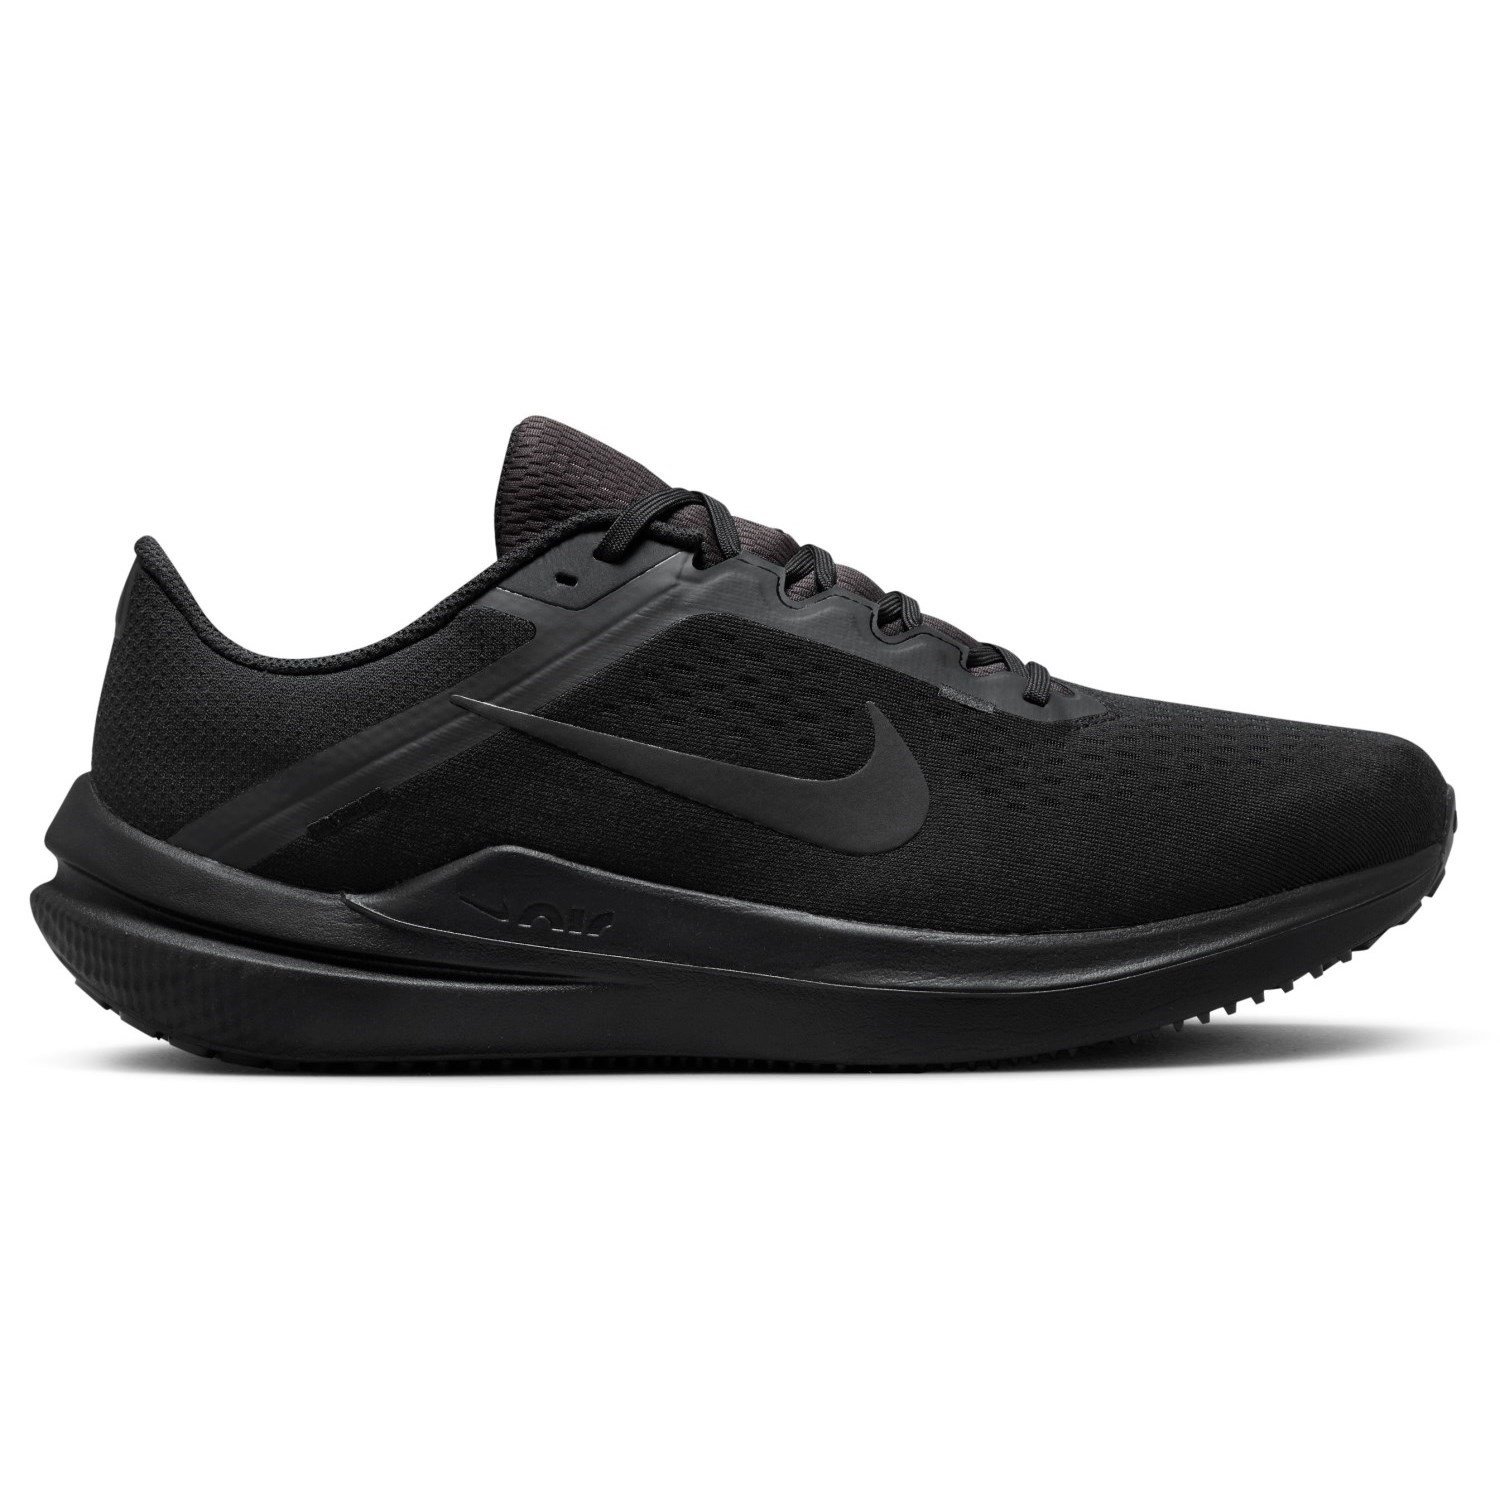 Nike Winflo 10 - Mens Running Shoes - Black/Black/Anthracite | Sportitude